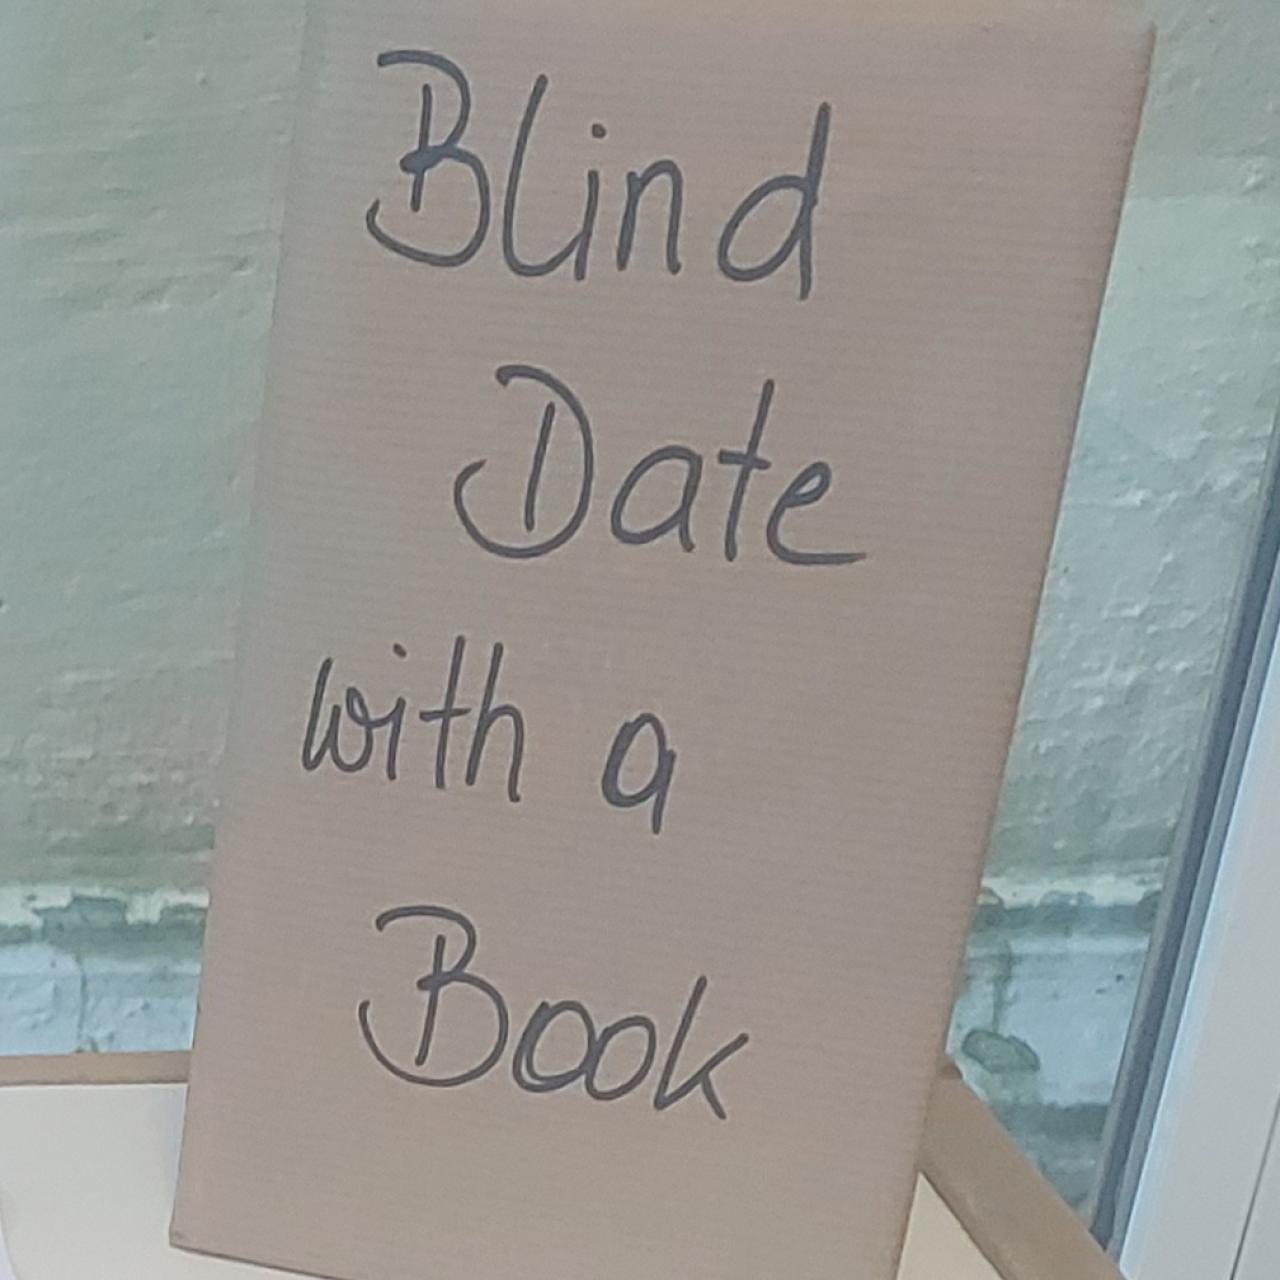 Blind Date with a Book 01